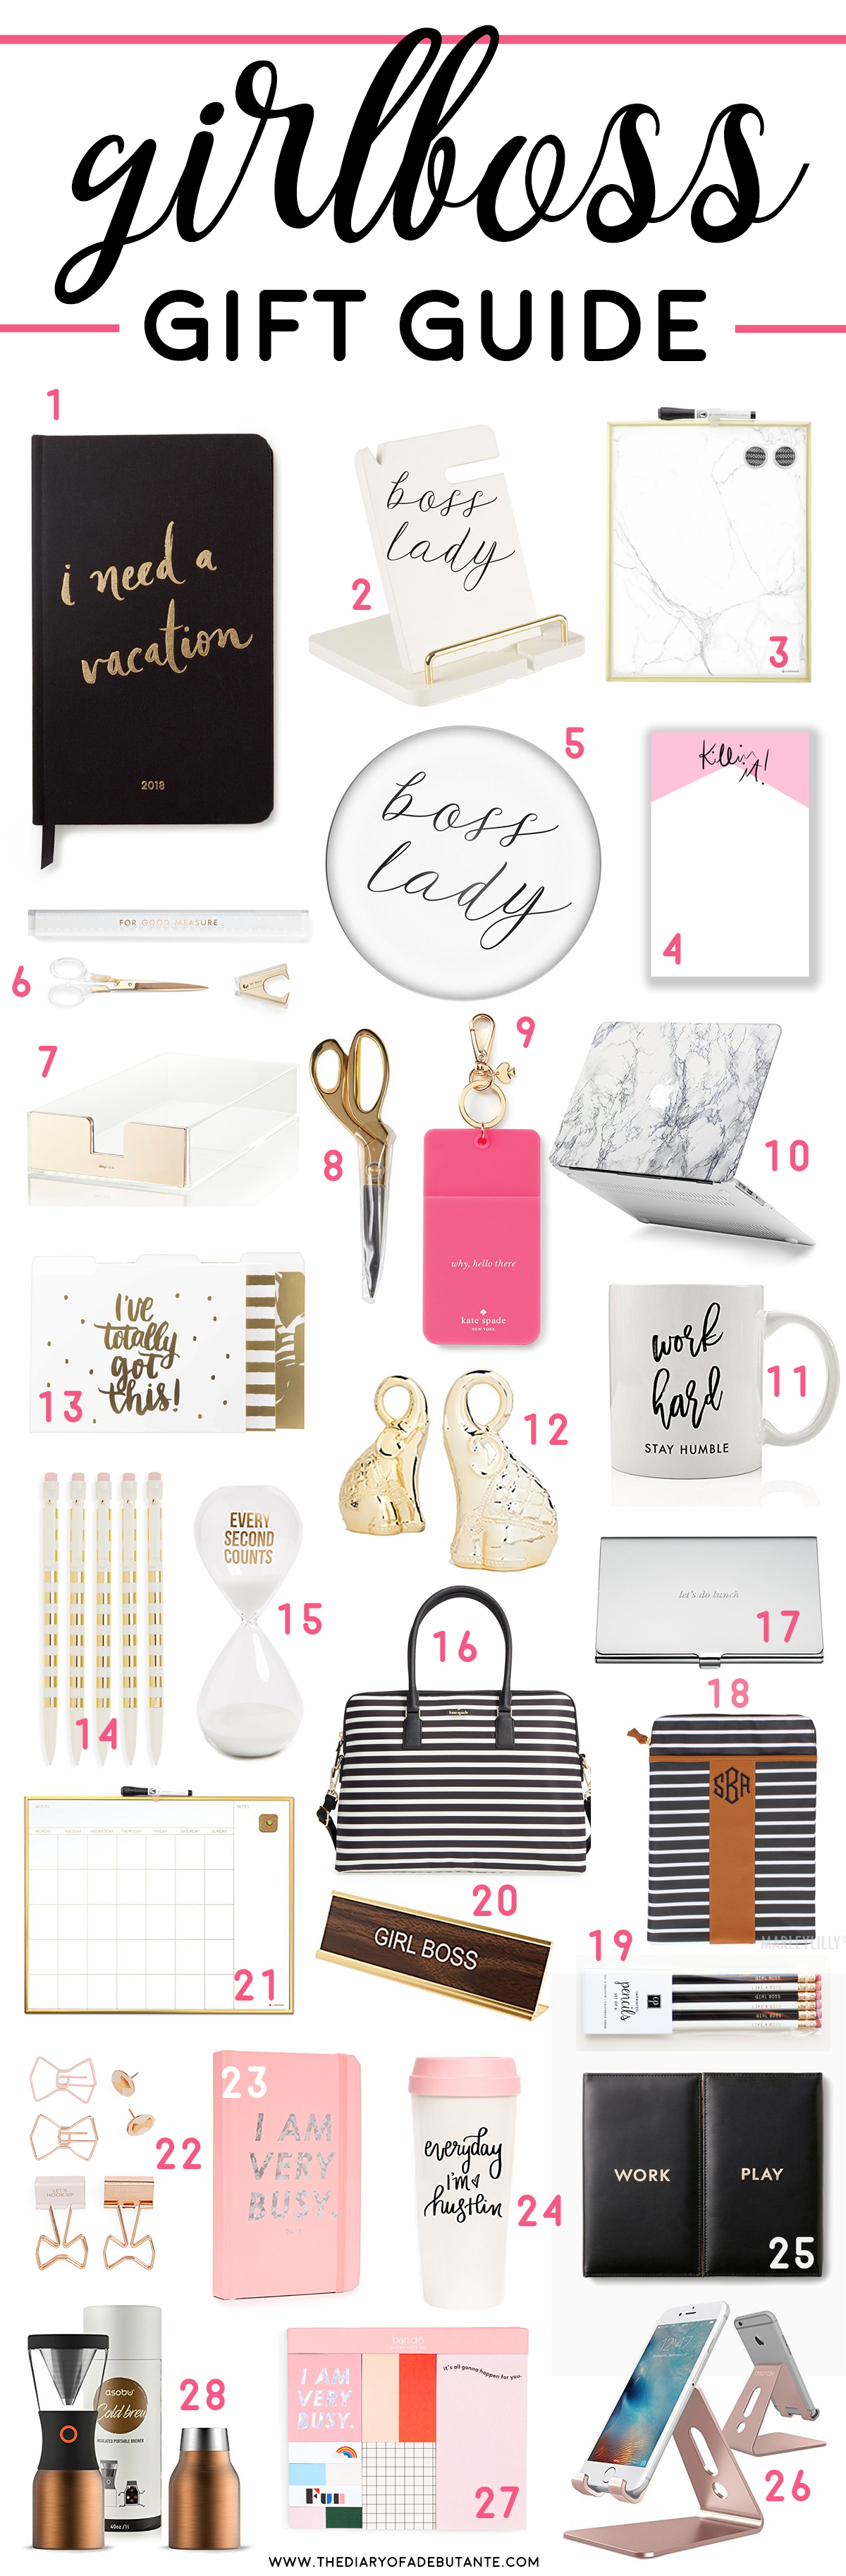 28 girlboss gift ideas for the workaholic woman in your life | Girlboss gift ideas | Gift ideas for workaholic women | Everyday She's Hustlin: Gift Guide for the Girlboss by southern blogger Stephanie Ziajka from Diary of a Debutante